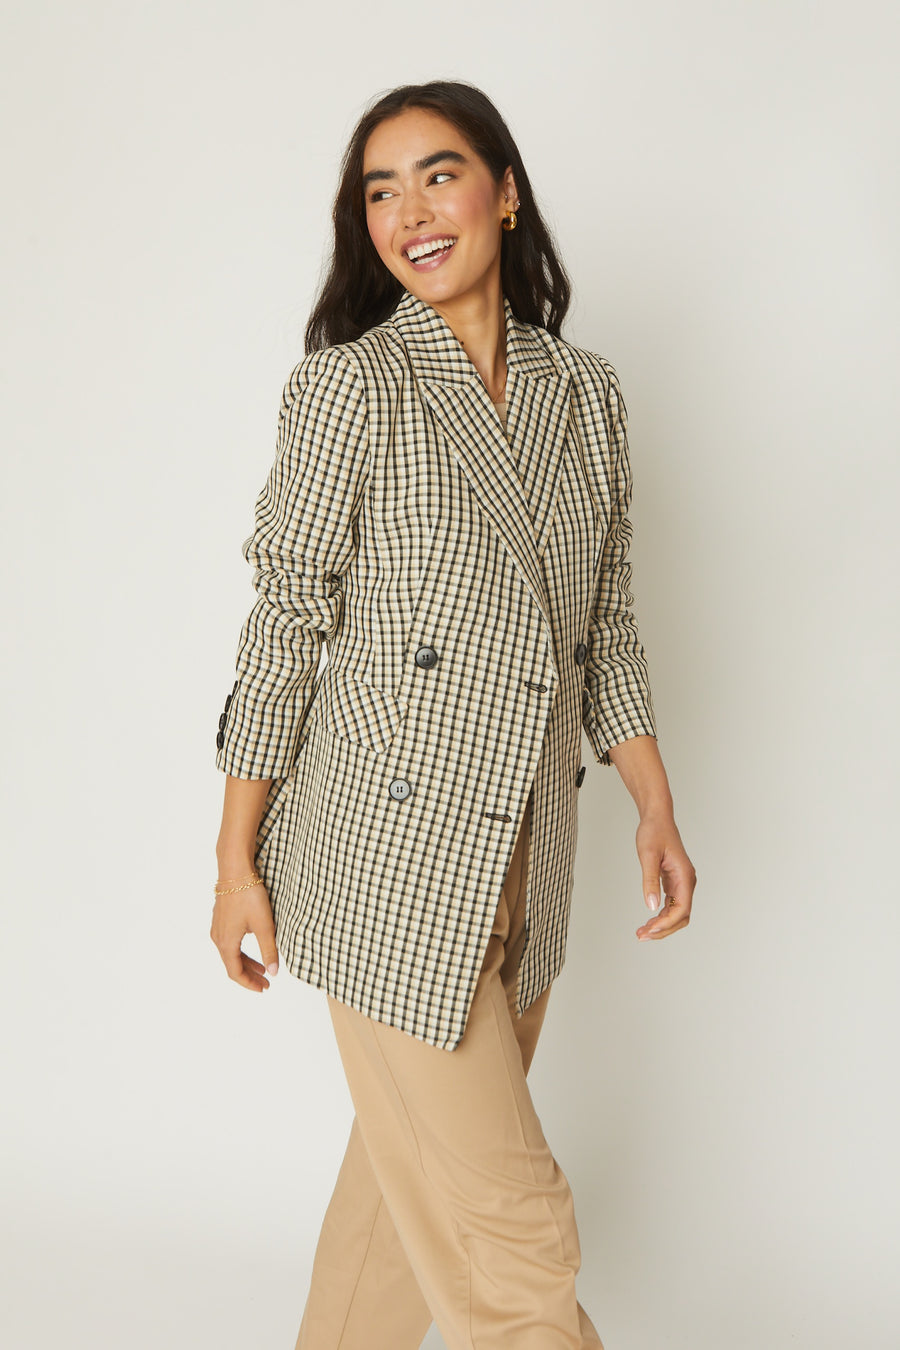 No Srcipt image - Images of 1 of 7 Classic Gingham Print Black White Blazer Jacket Oversized Fit Workwear Office Wear Professional Attire Classic Chic Staple Timeless Blazer